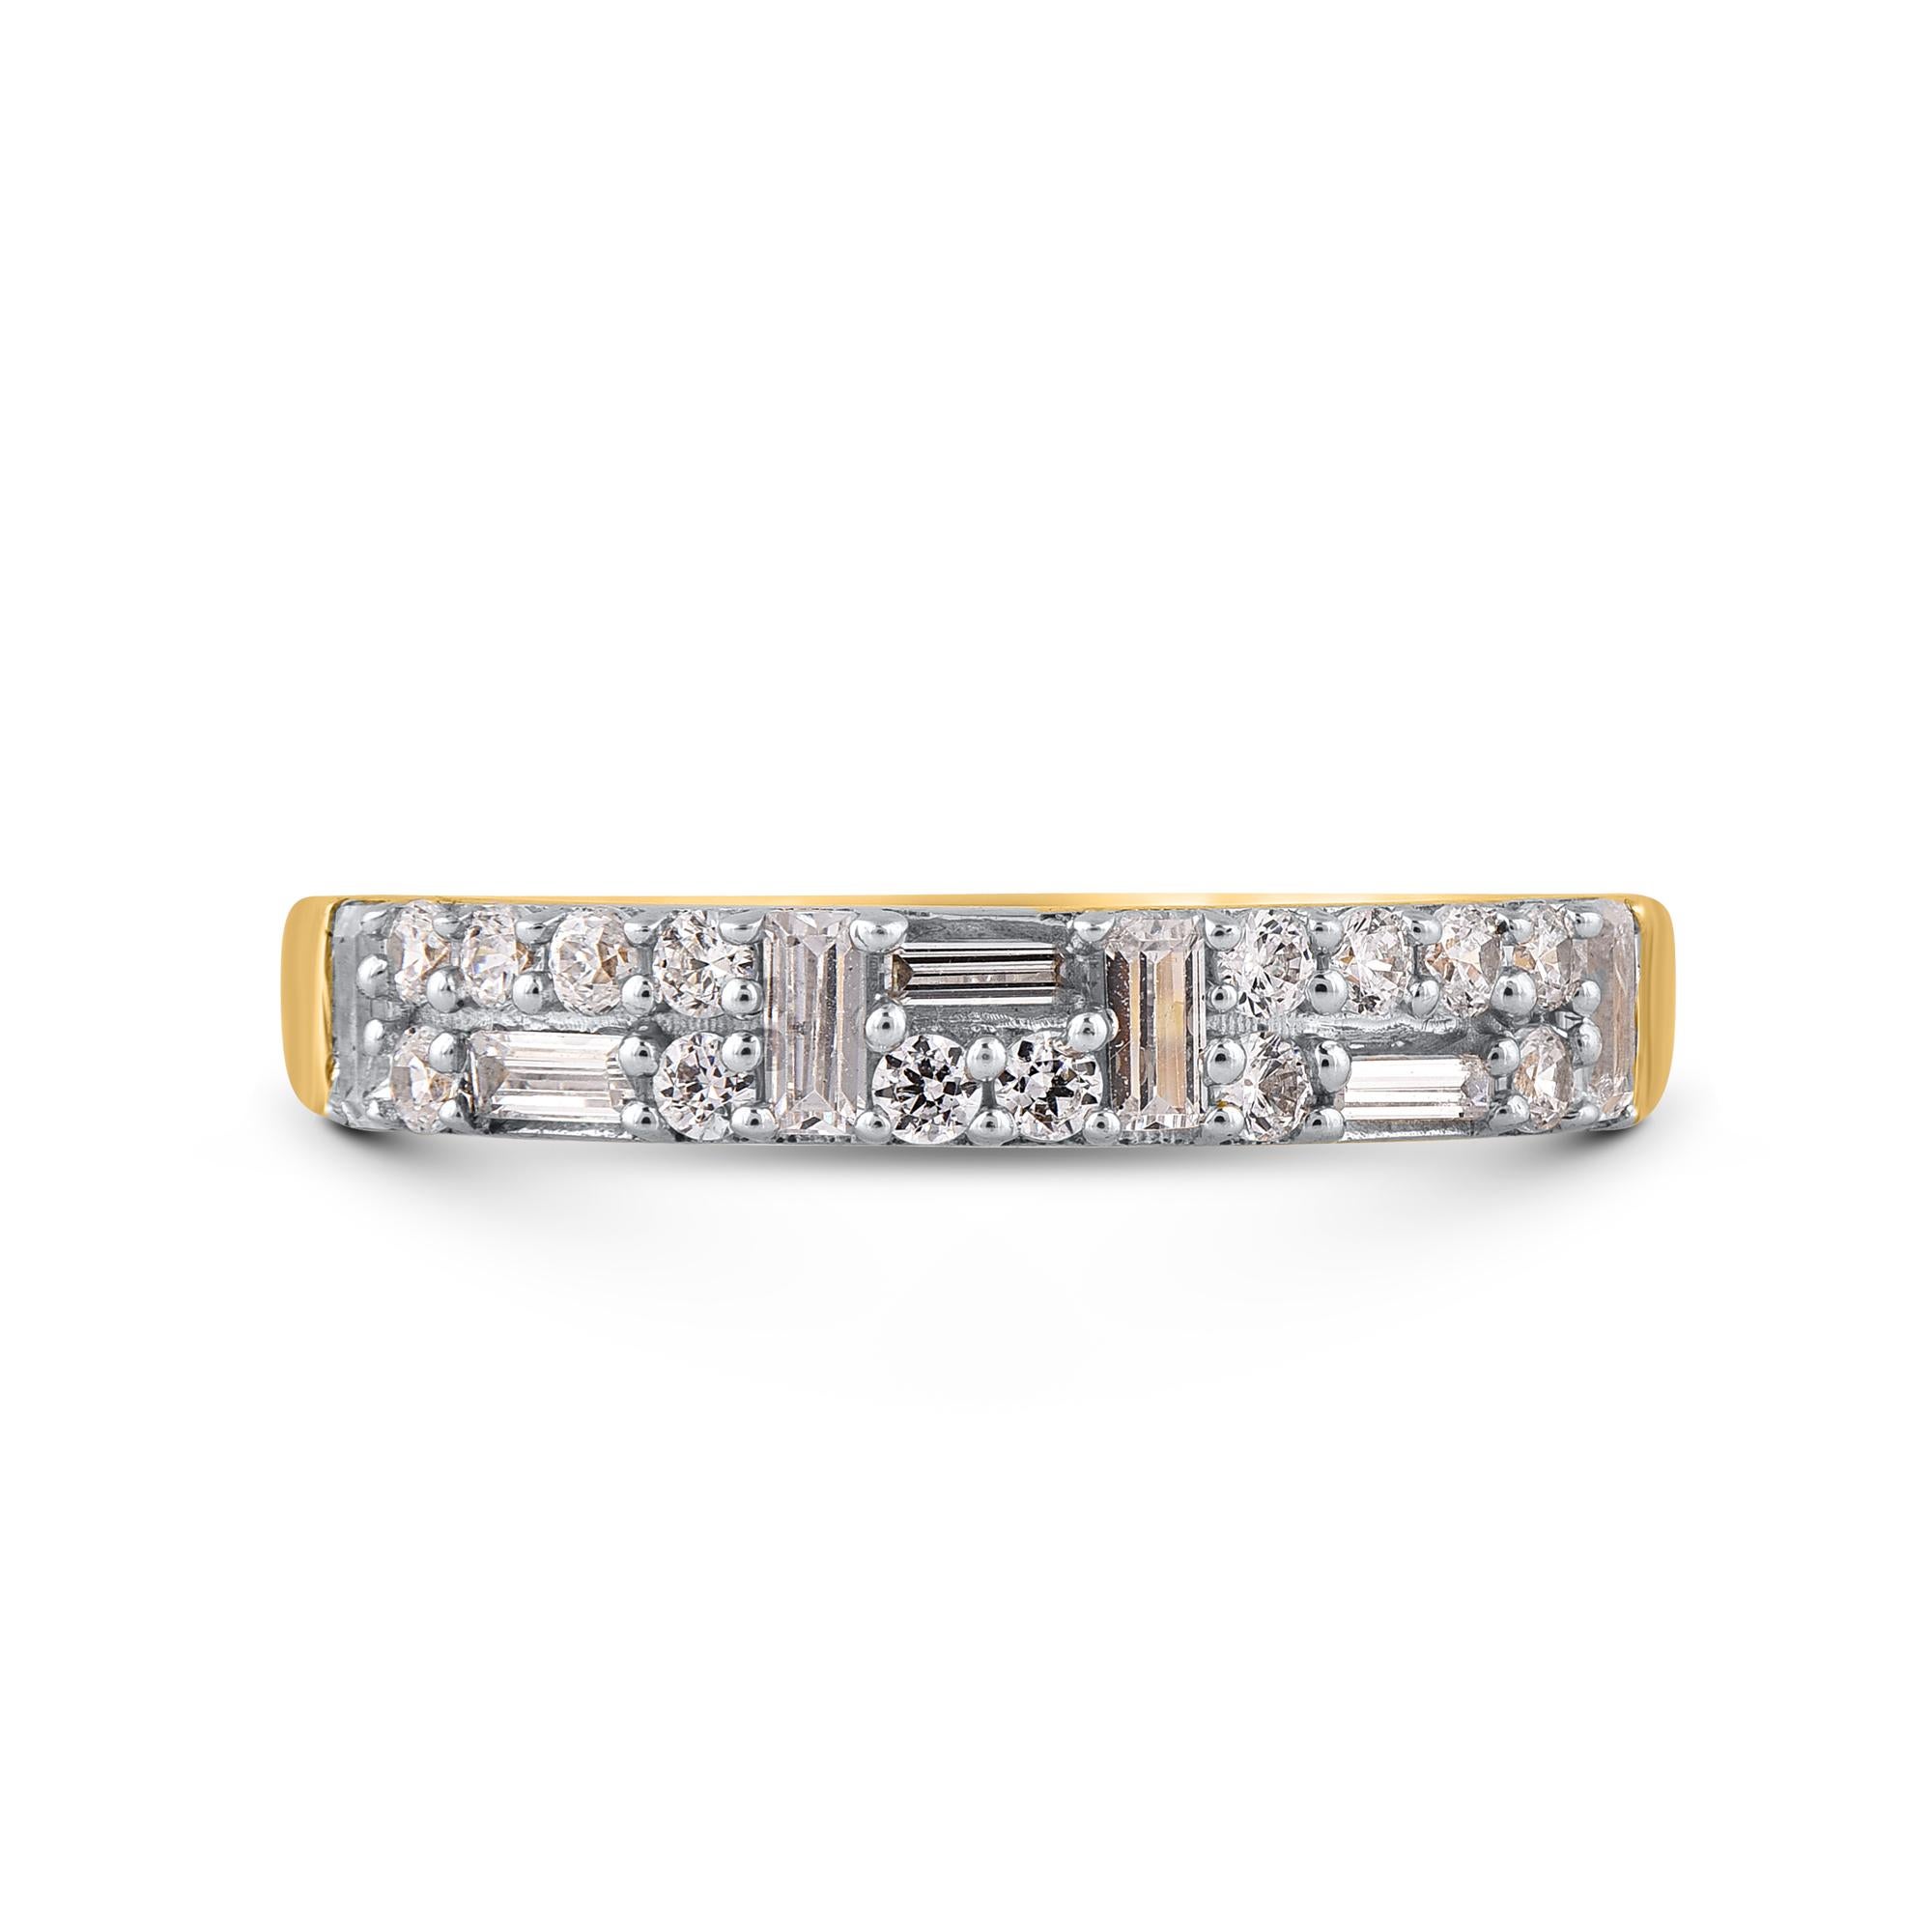 Honor your special day with this exceptional diamond band ring. This band ring features a sparkling 21 brilliant cut & baguette diamonds beautifully set in prong setting. The total diamond weight is 0.50 Carat. The diamonds are graded as H-I color